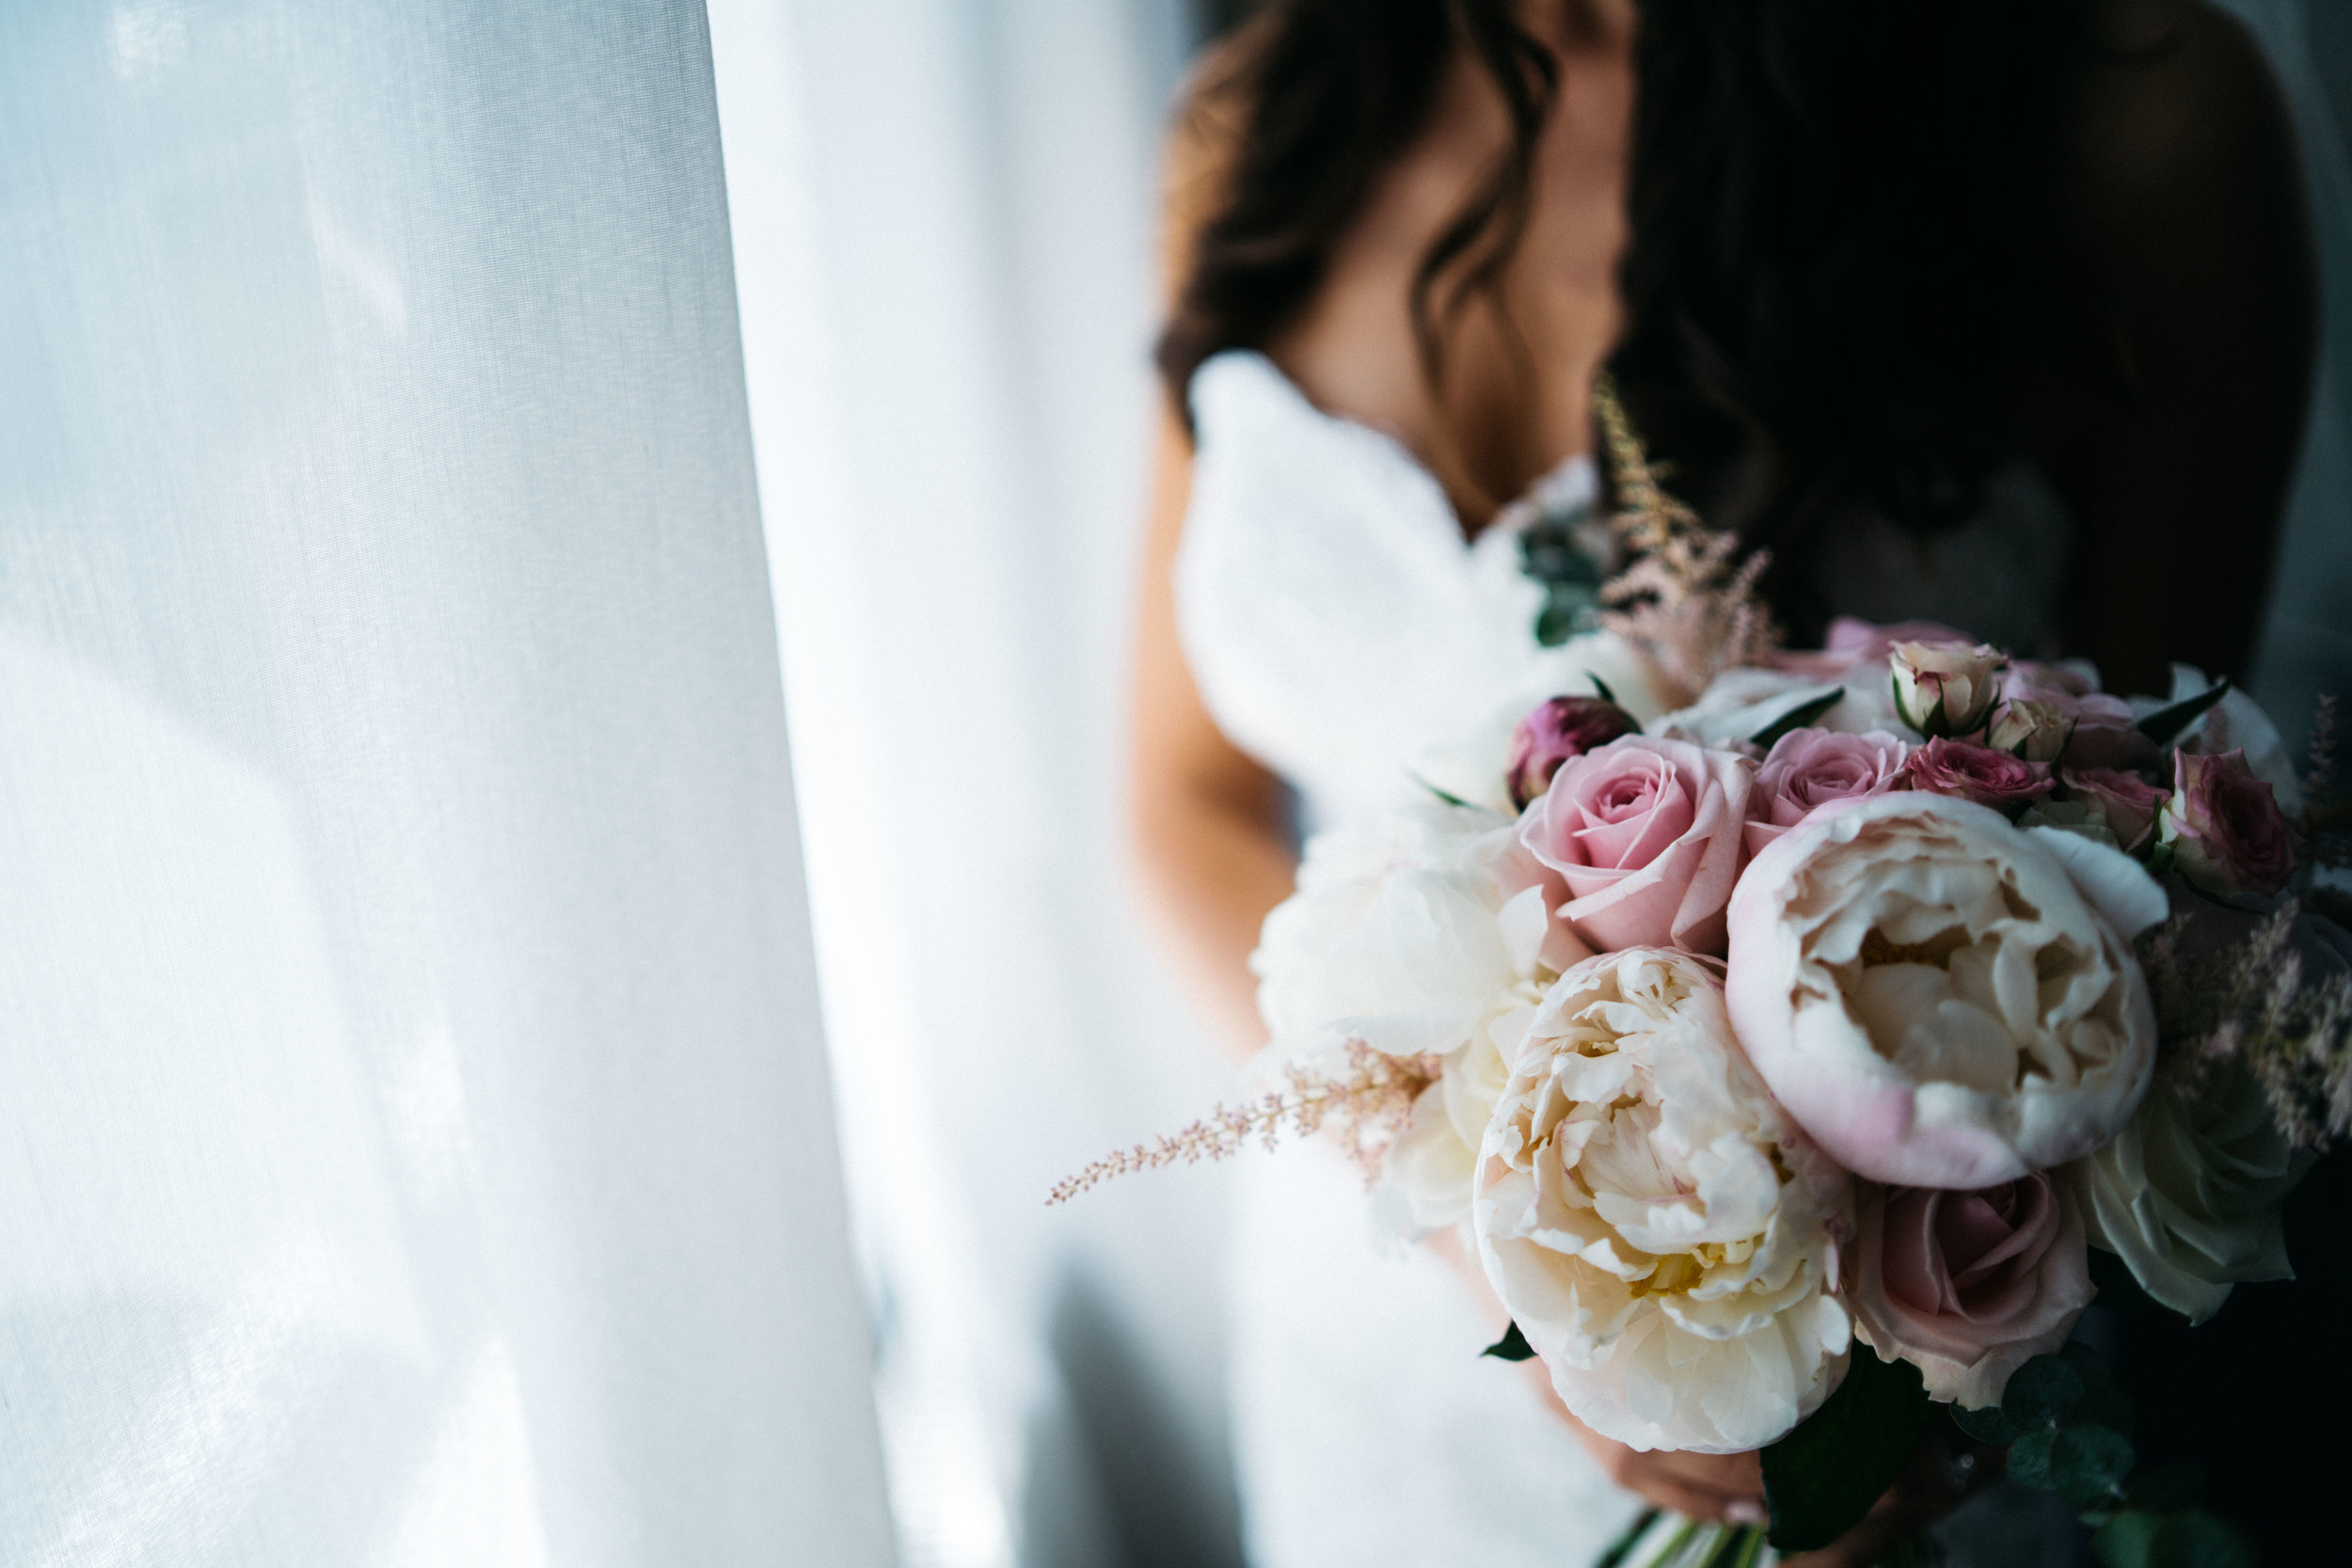 The bride and bouquet